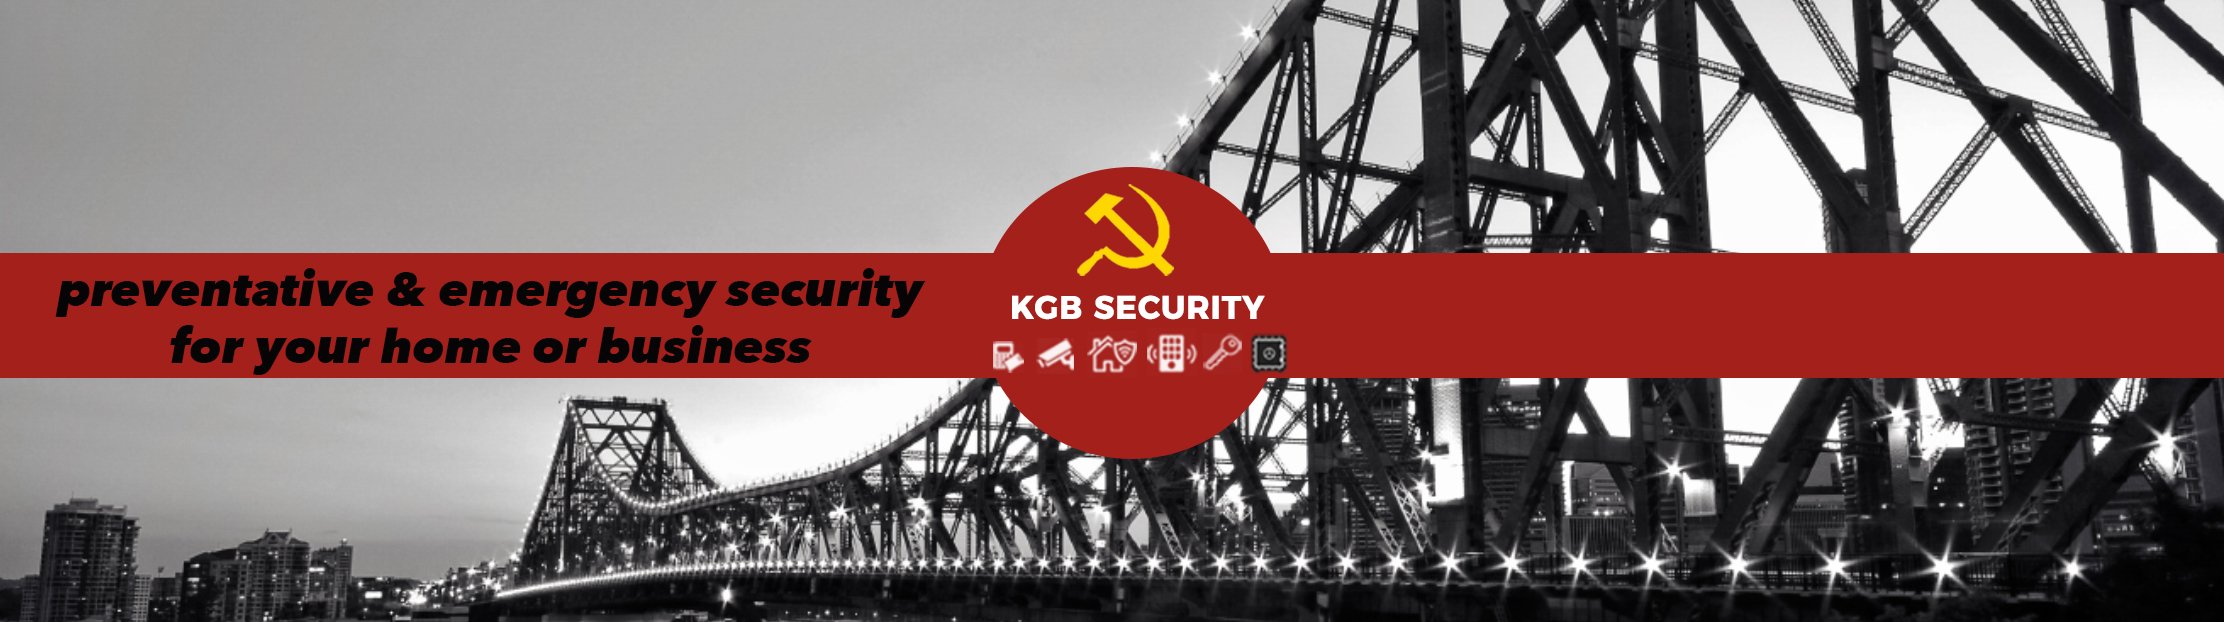 Electronic Security System by KGB Security